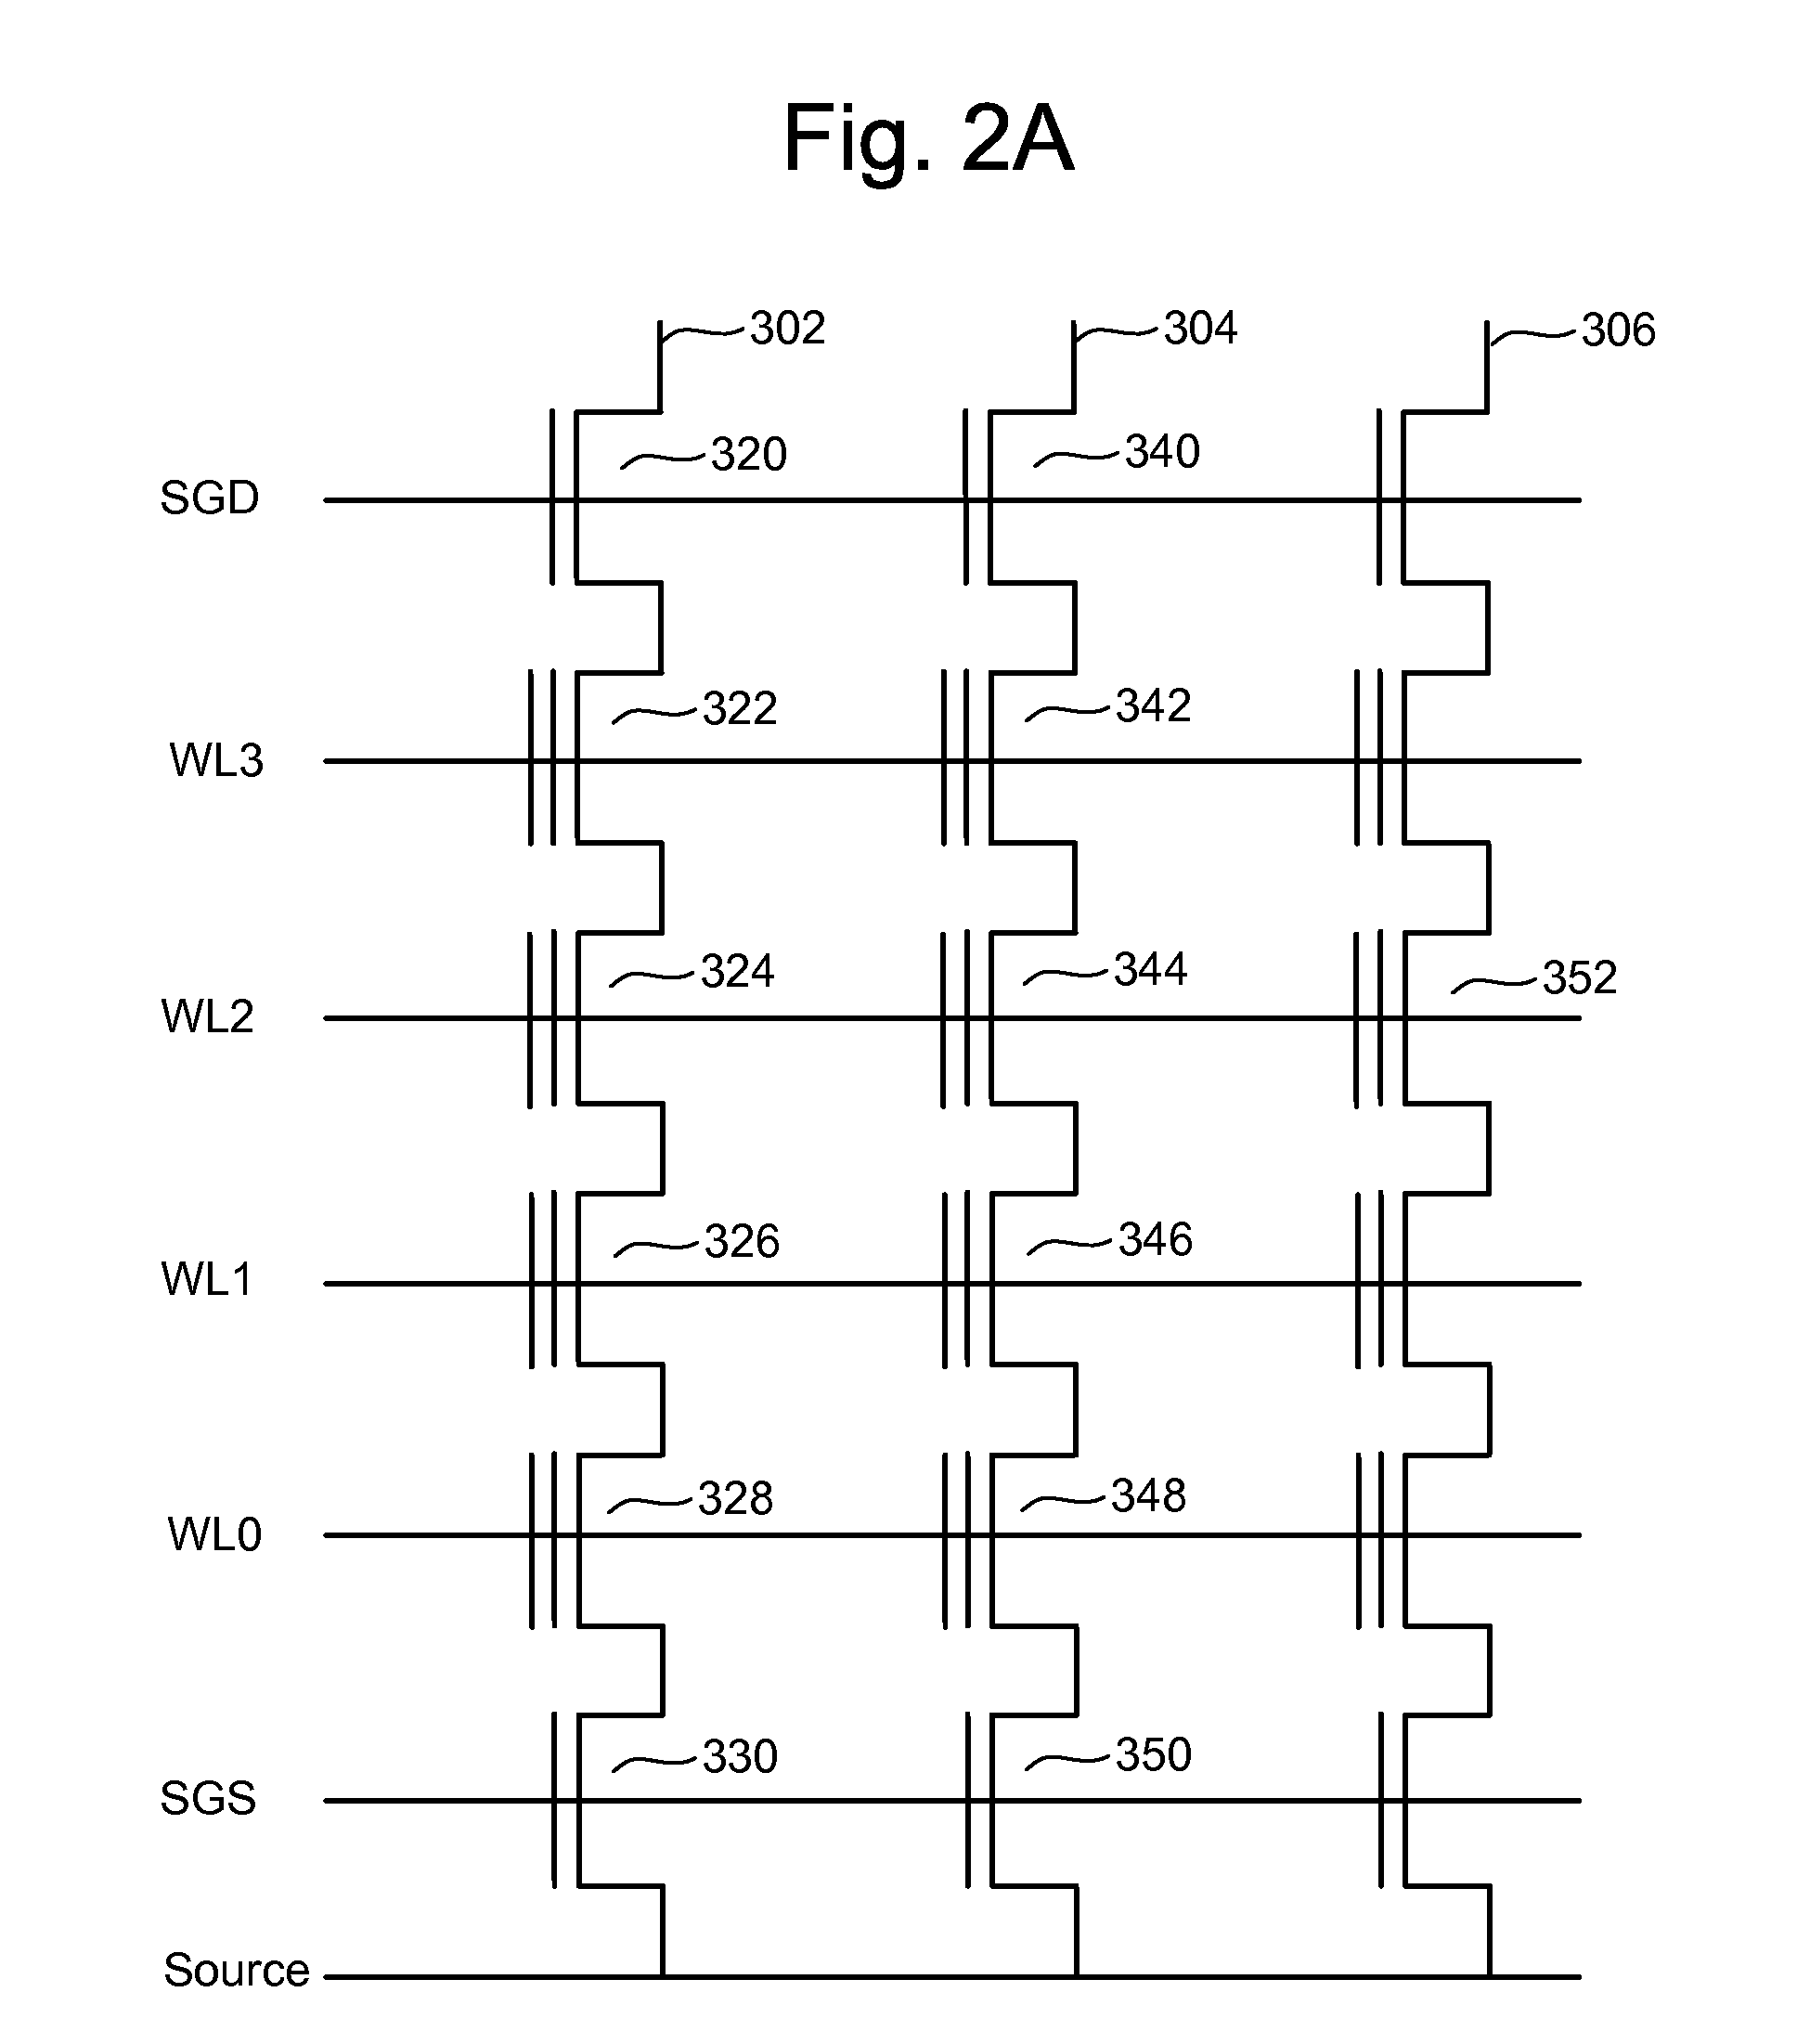 Fabricating and operating a memory array having a multi-level cell region and a single-level cell region